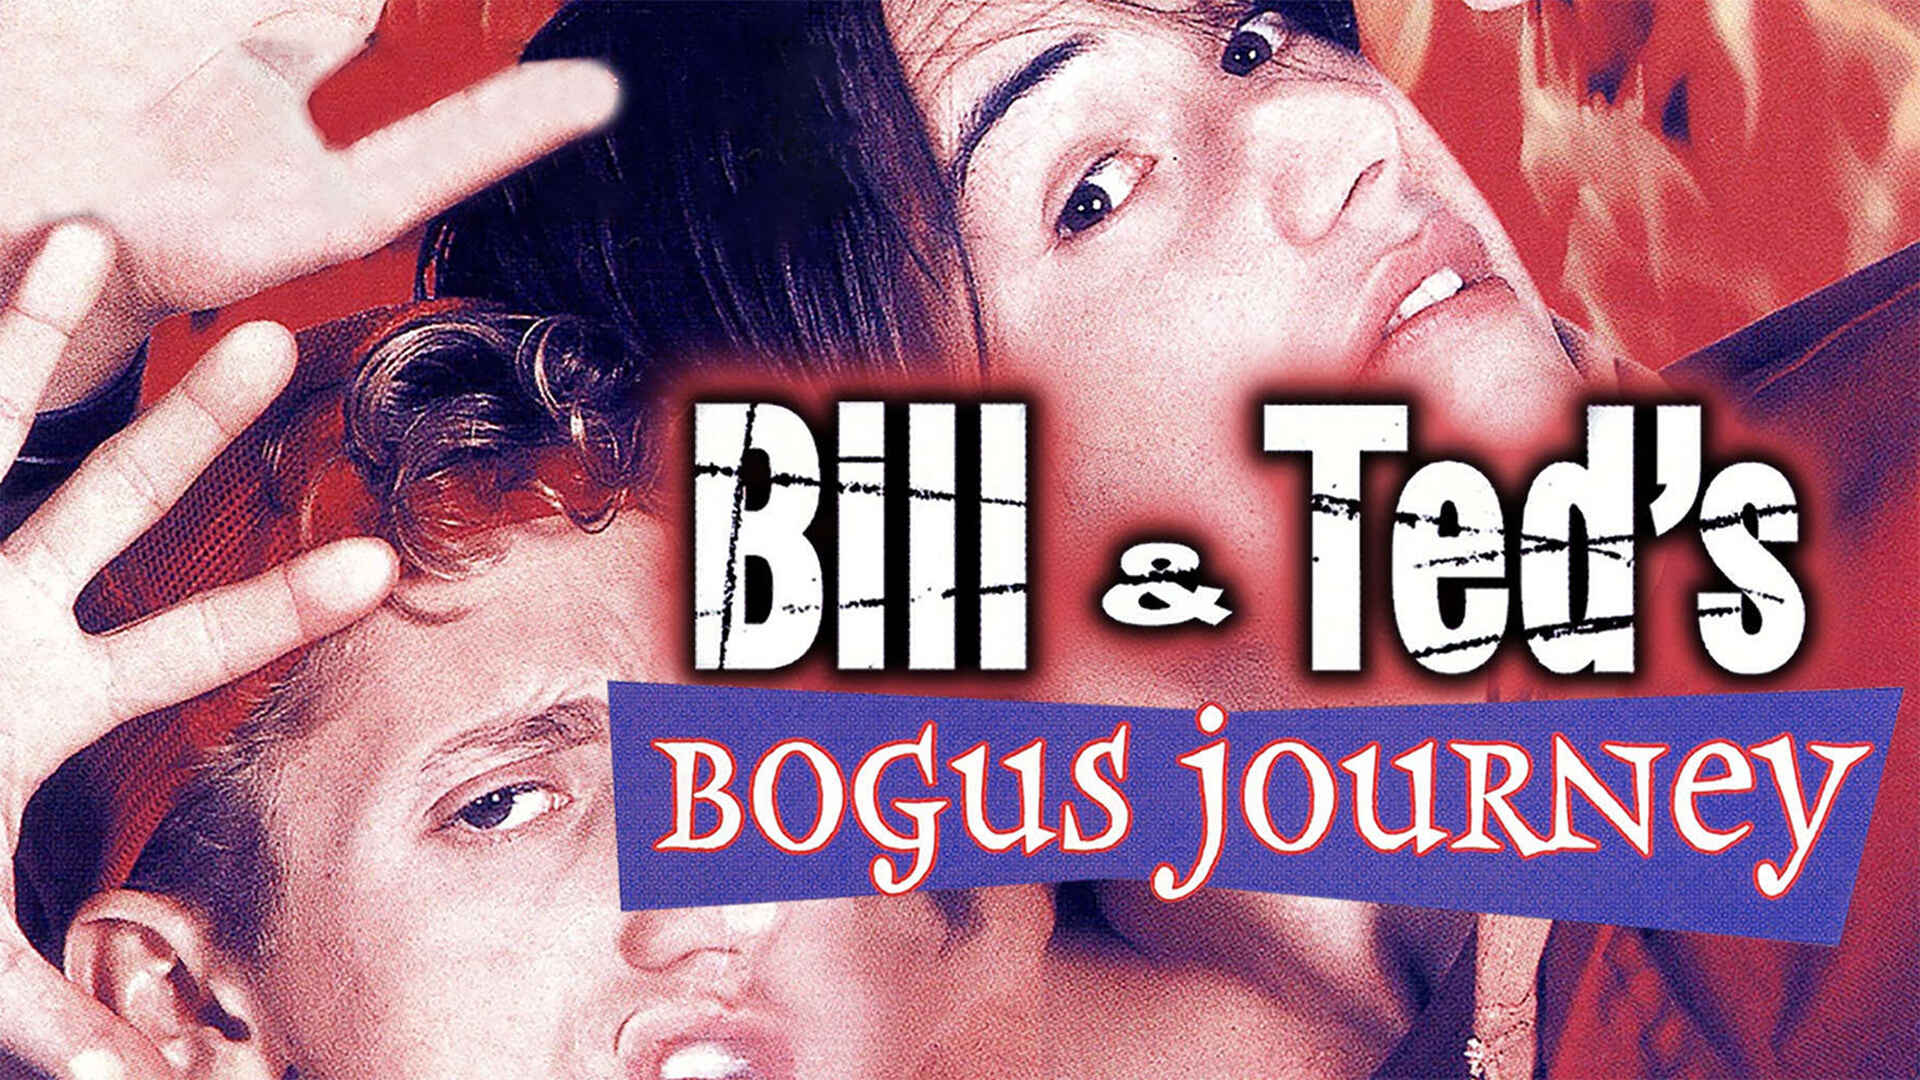 45-facts-about-the-movie-bill-teds-bogus-journey